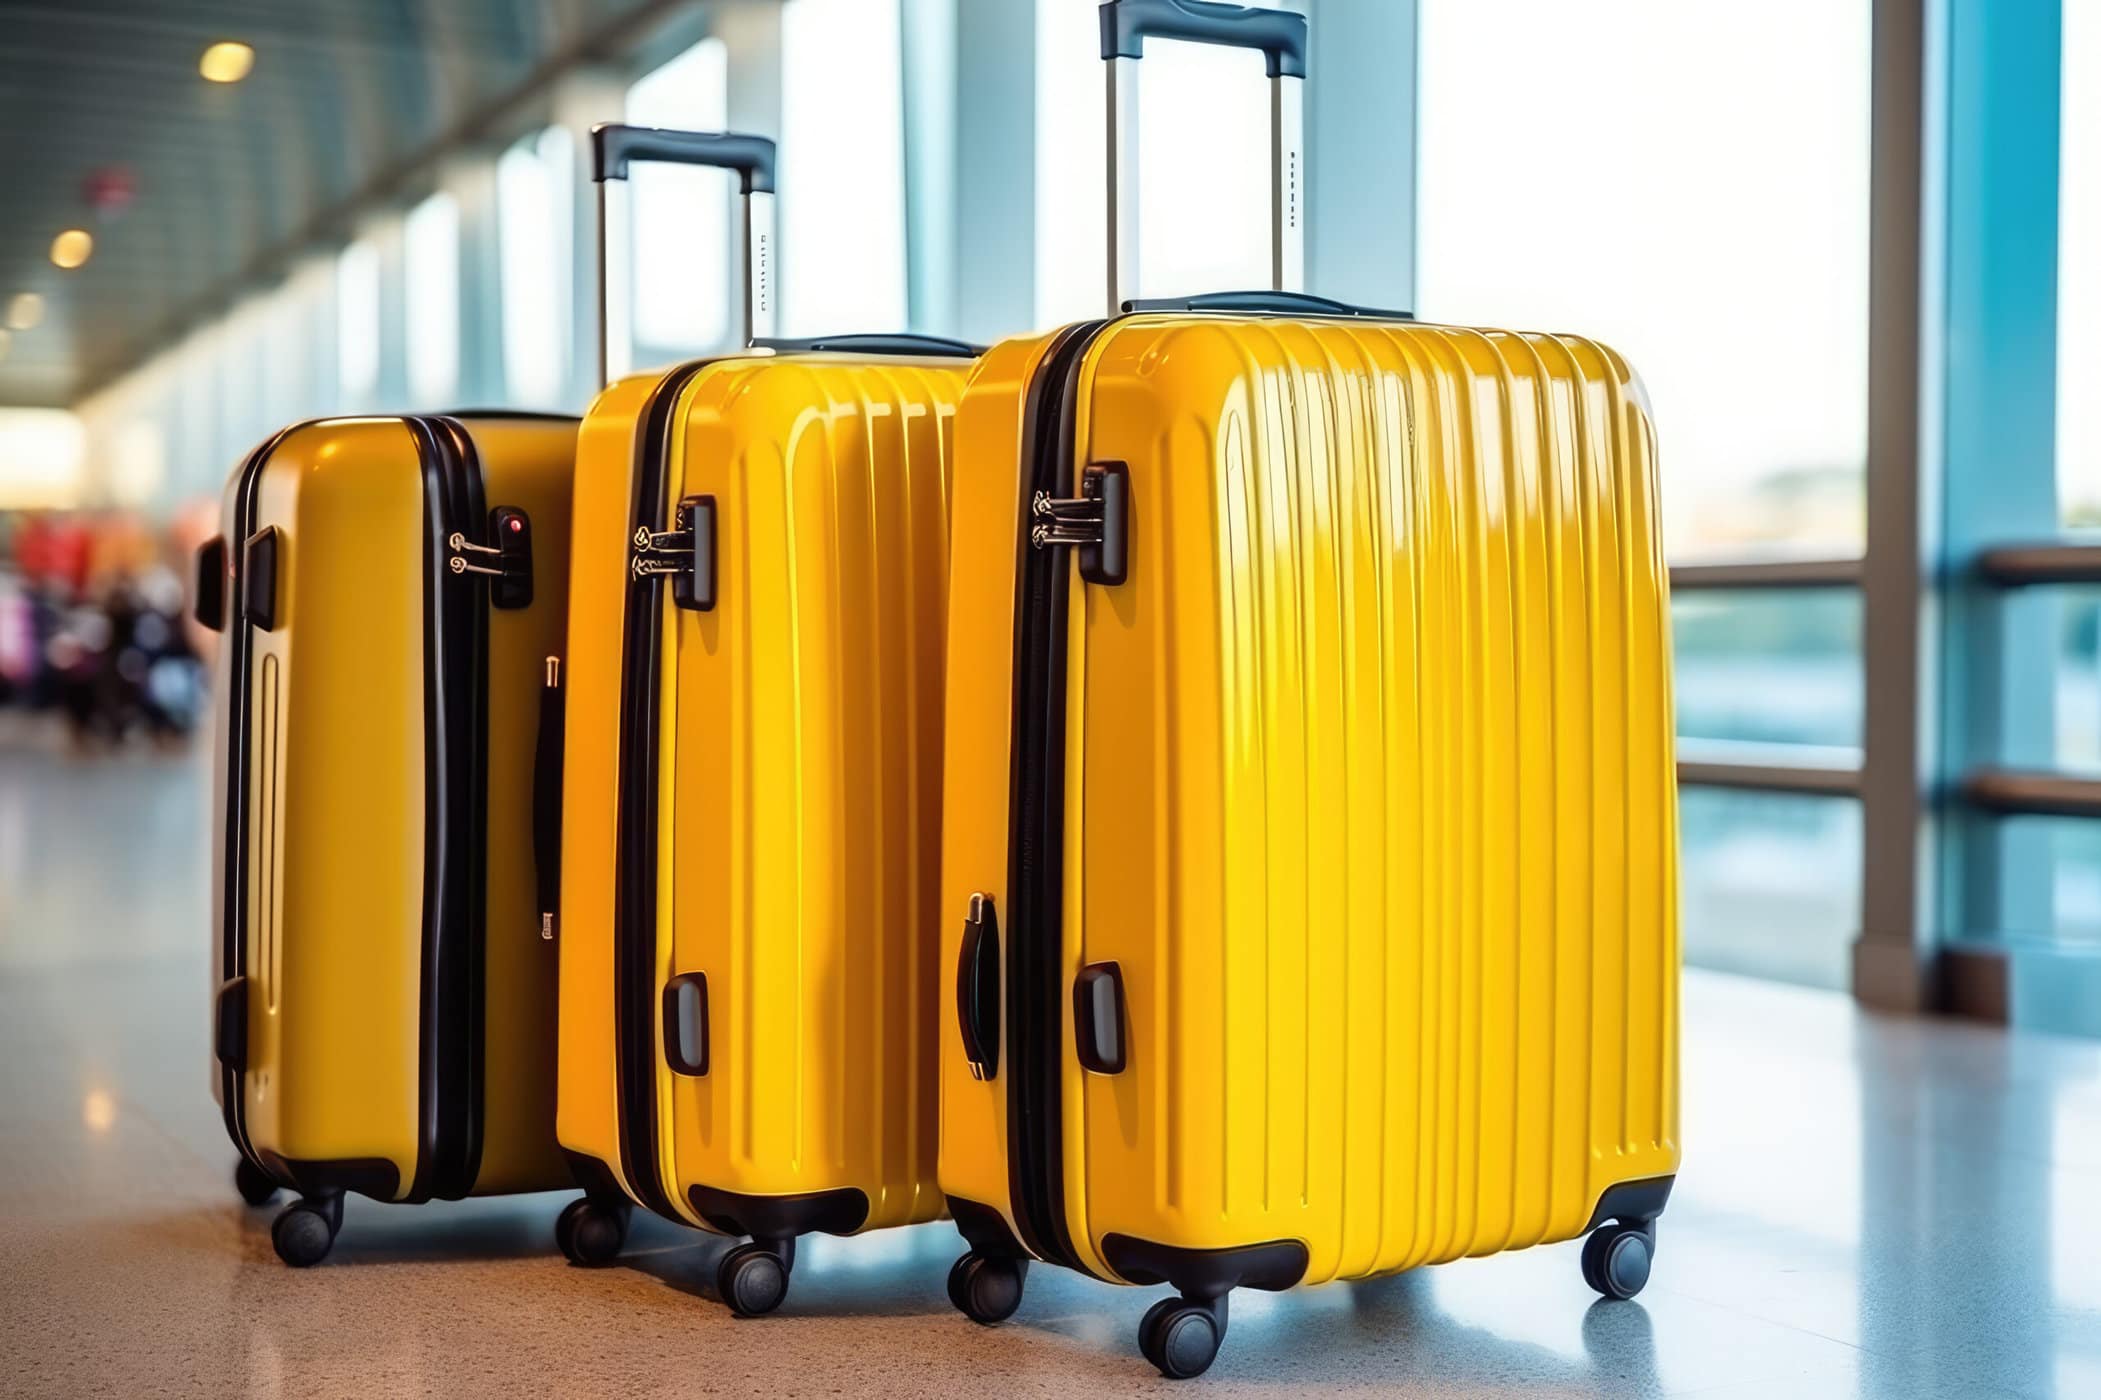 Navigator outperformed all metrics for luggage retailer's campaign and ...